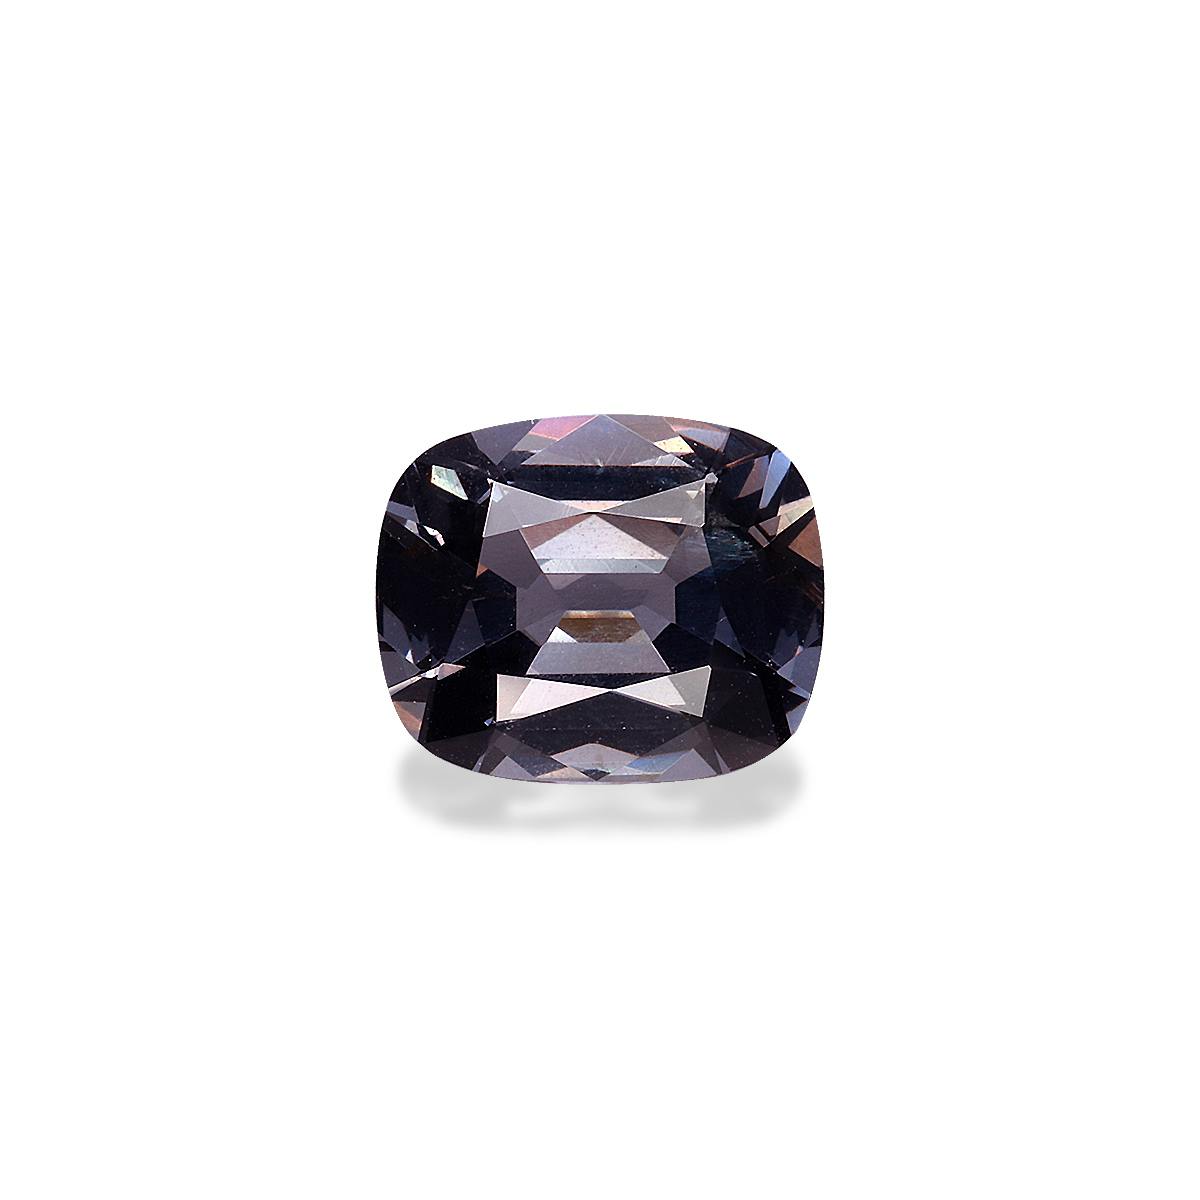 Grey Spinel 1.37ct (SP0203)